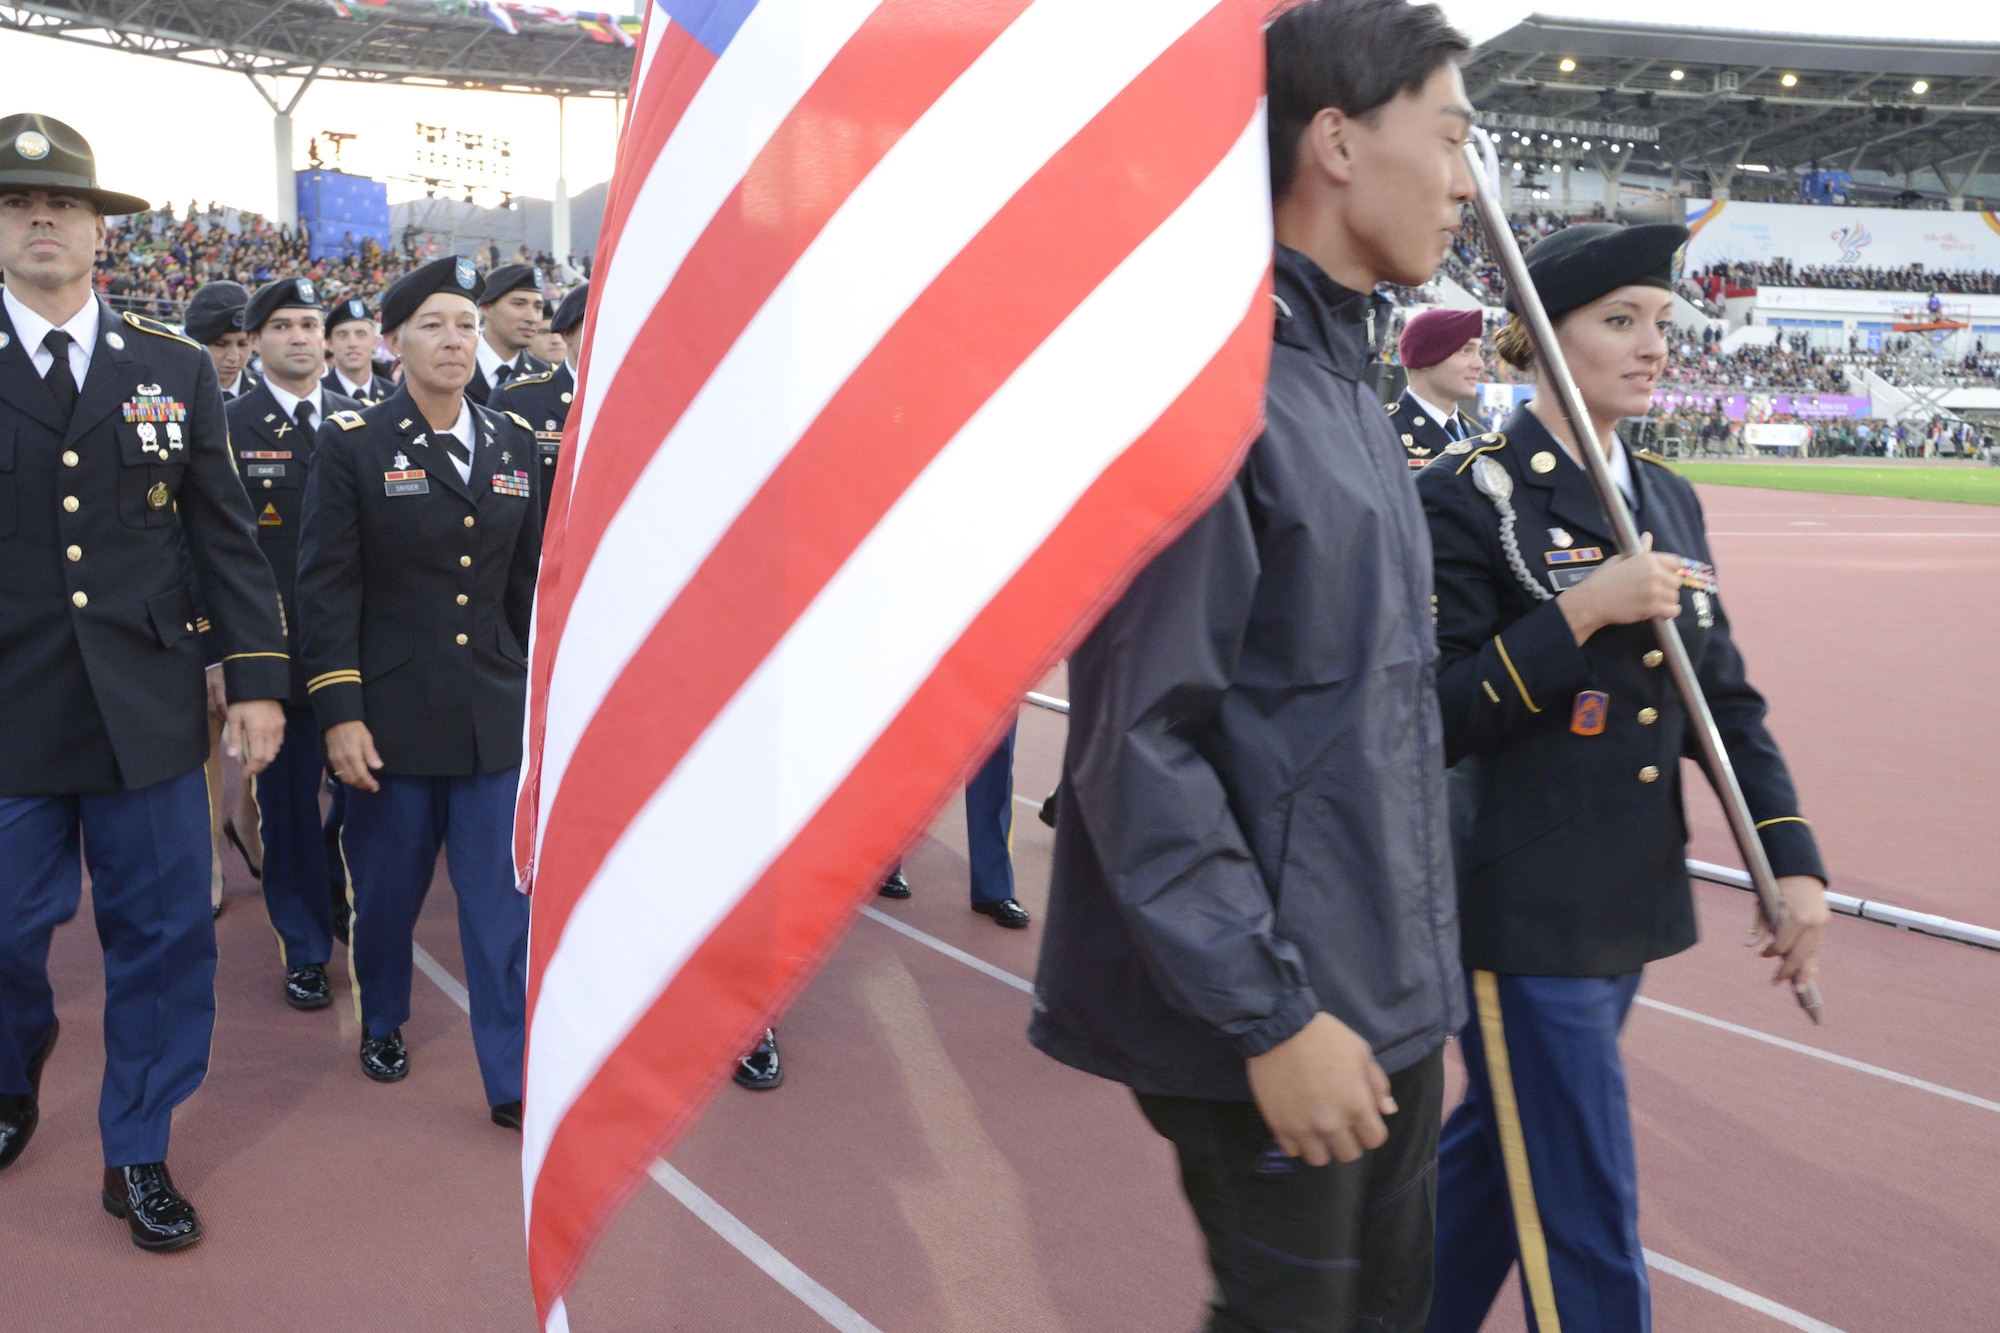 Sgt. Elizabeth Wasil carries the American flag into the opening ceremony of the International Military Sports Council World Games in Mungyeong, South Korea, Oct. 2, 2015. About 165 athletes and coaches followed behind her. (U.S. Armed Forces Sports photo/Gary Sheftick)